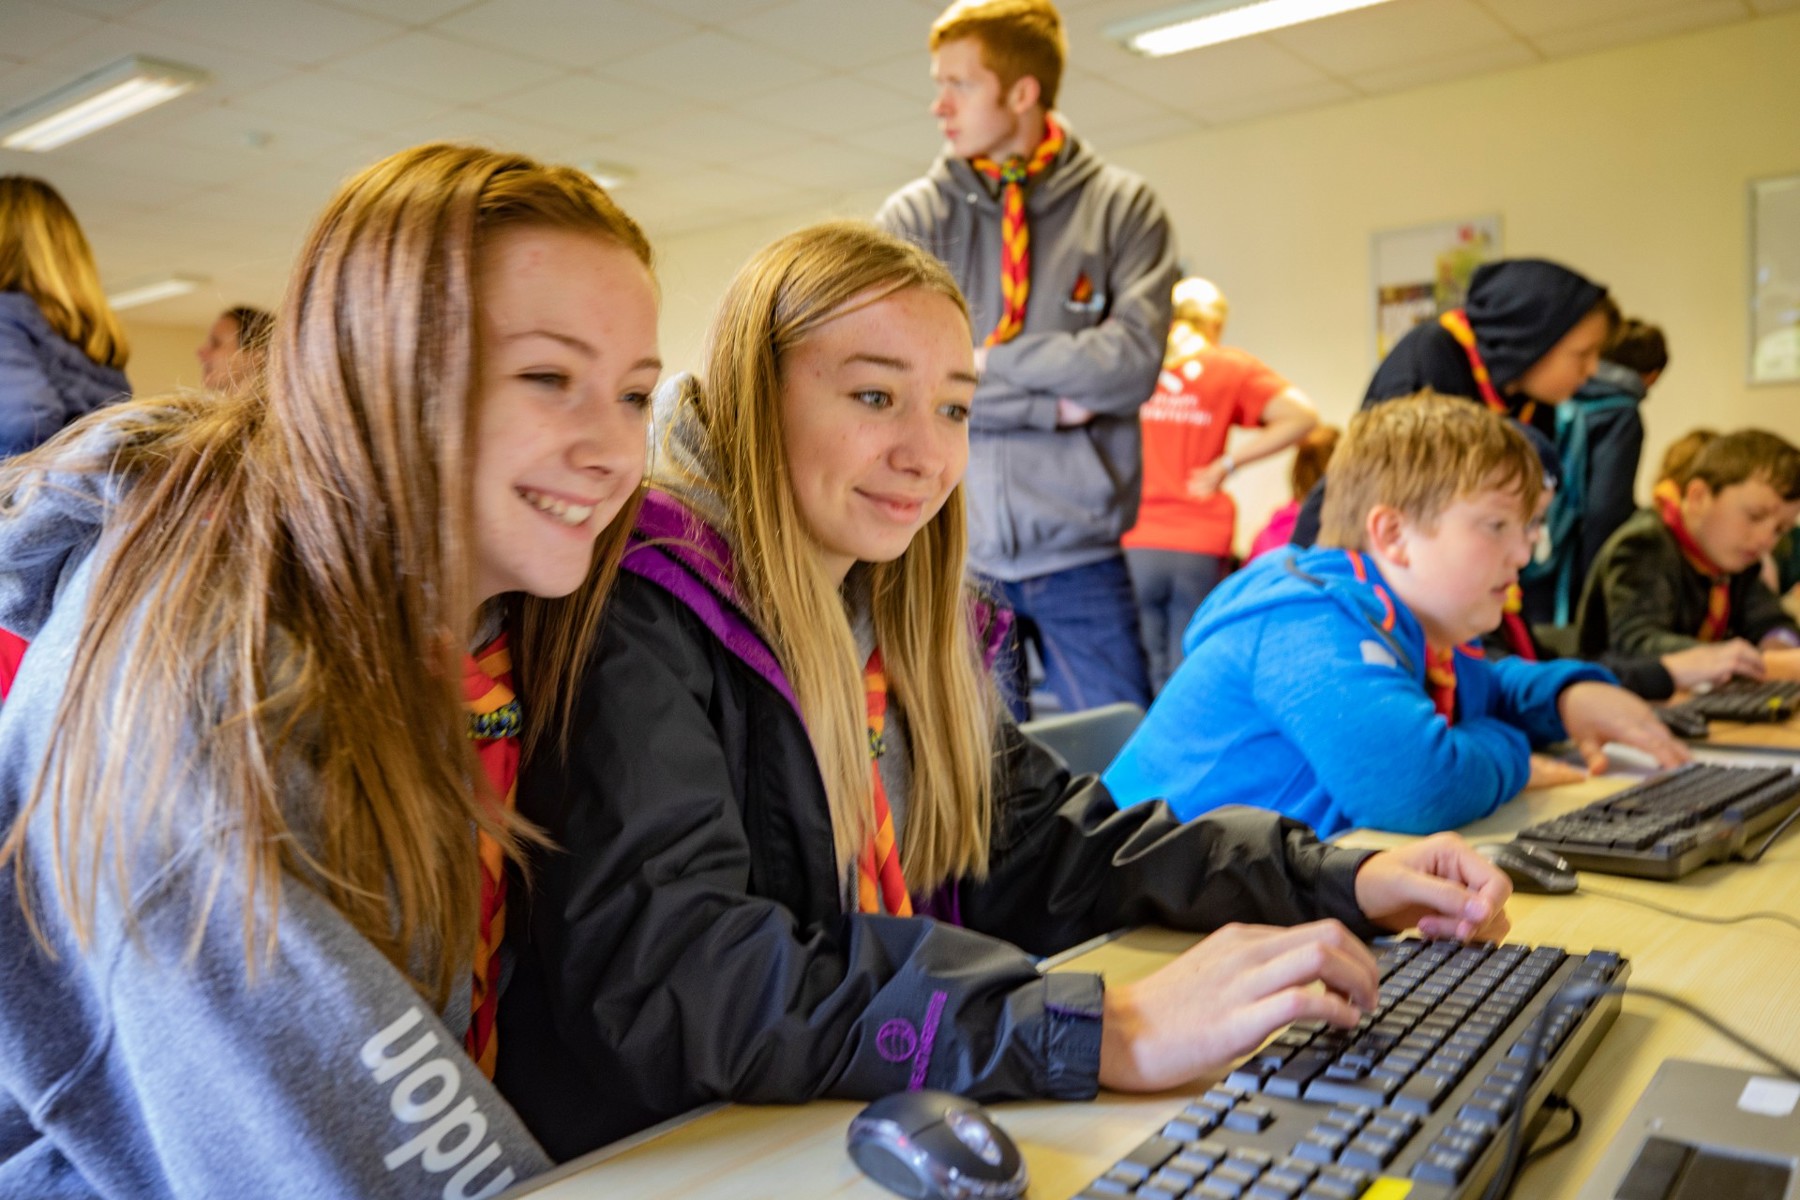 A group of Scouts are in a room, sat in front of computers. Two girls are in the front of the image, wearing neckers and using a keyboard. They are smiling and engaged.